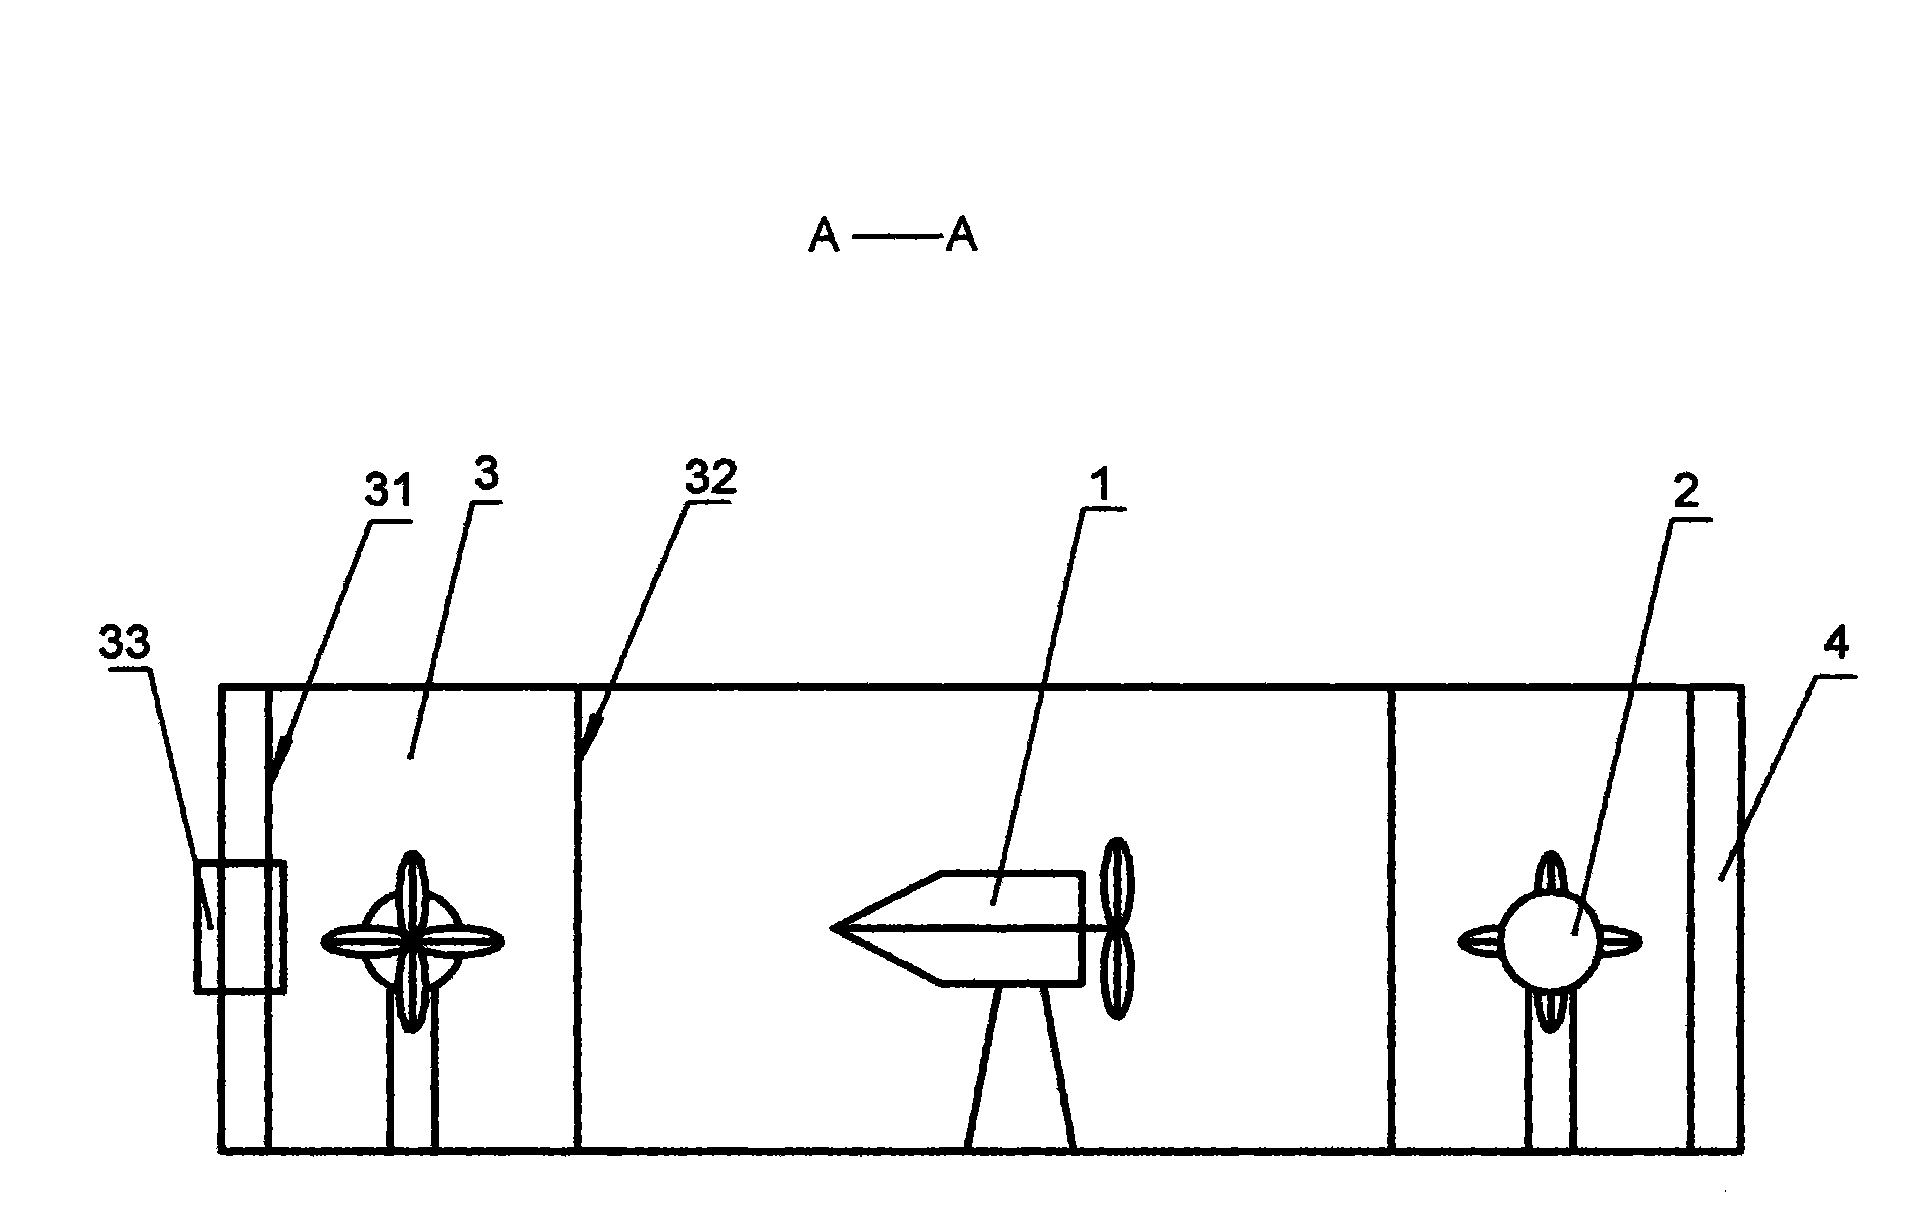 Generator for converting air power into electric energy